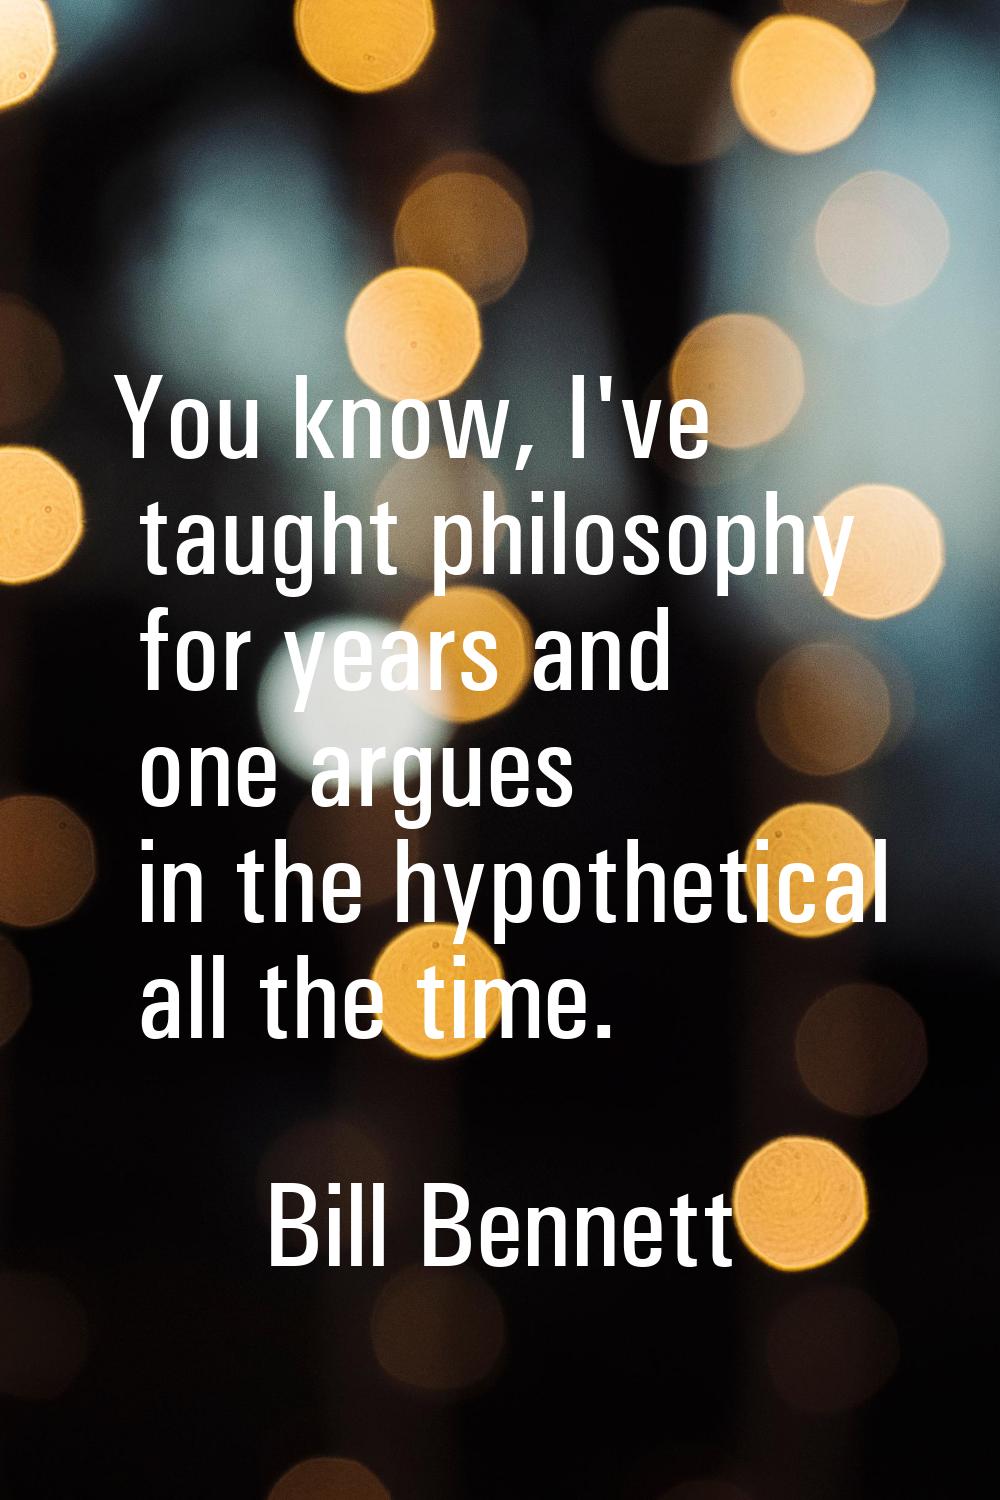 You know, I've taught philosophy for years and one argues in the hypothetical all the time.